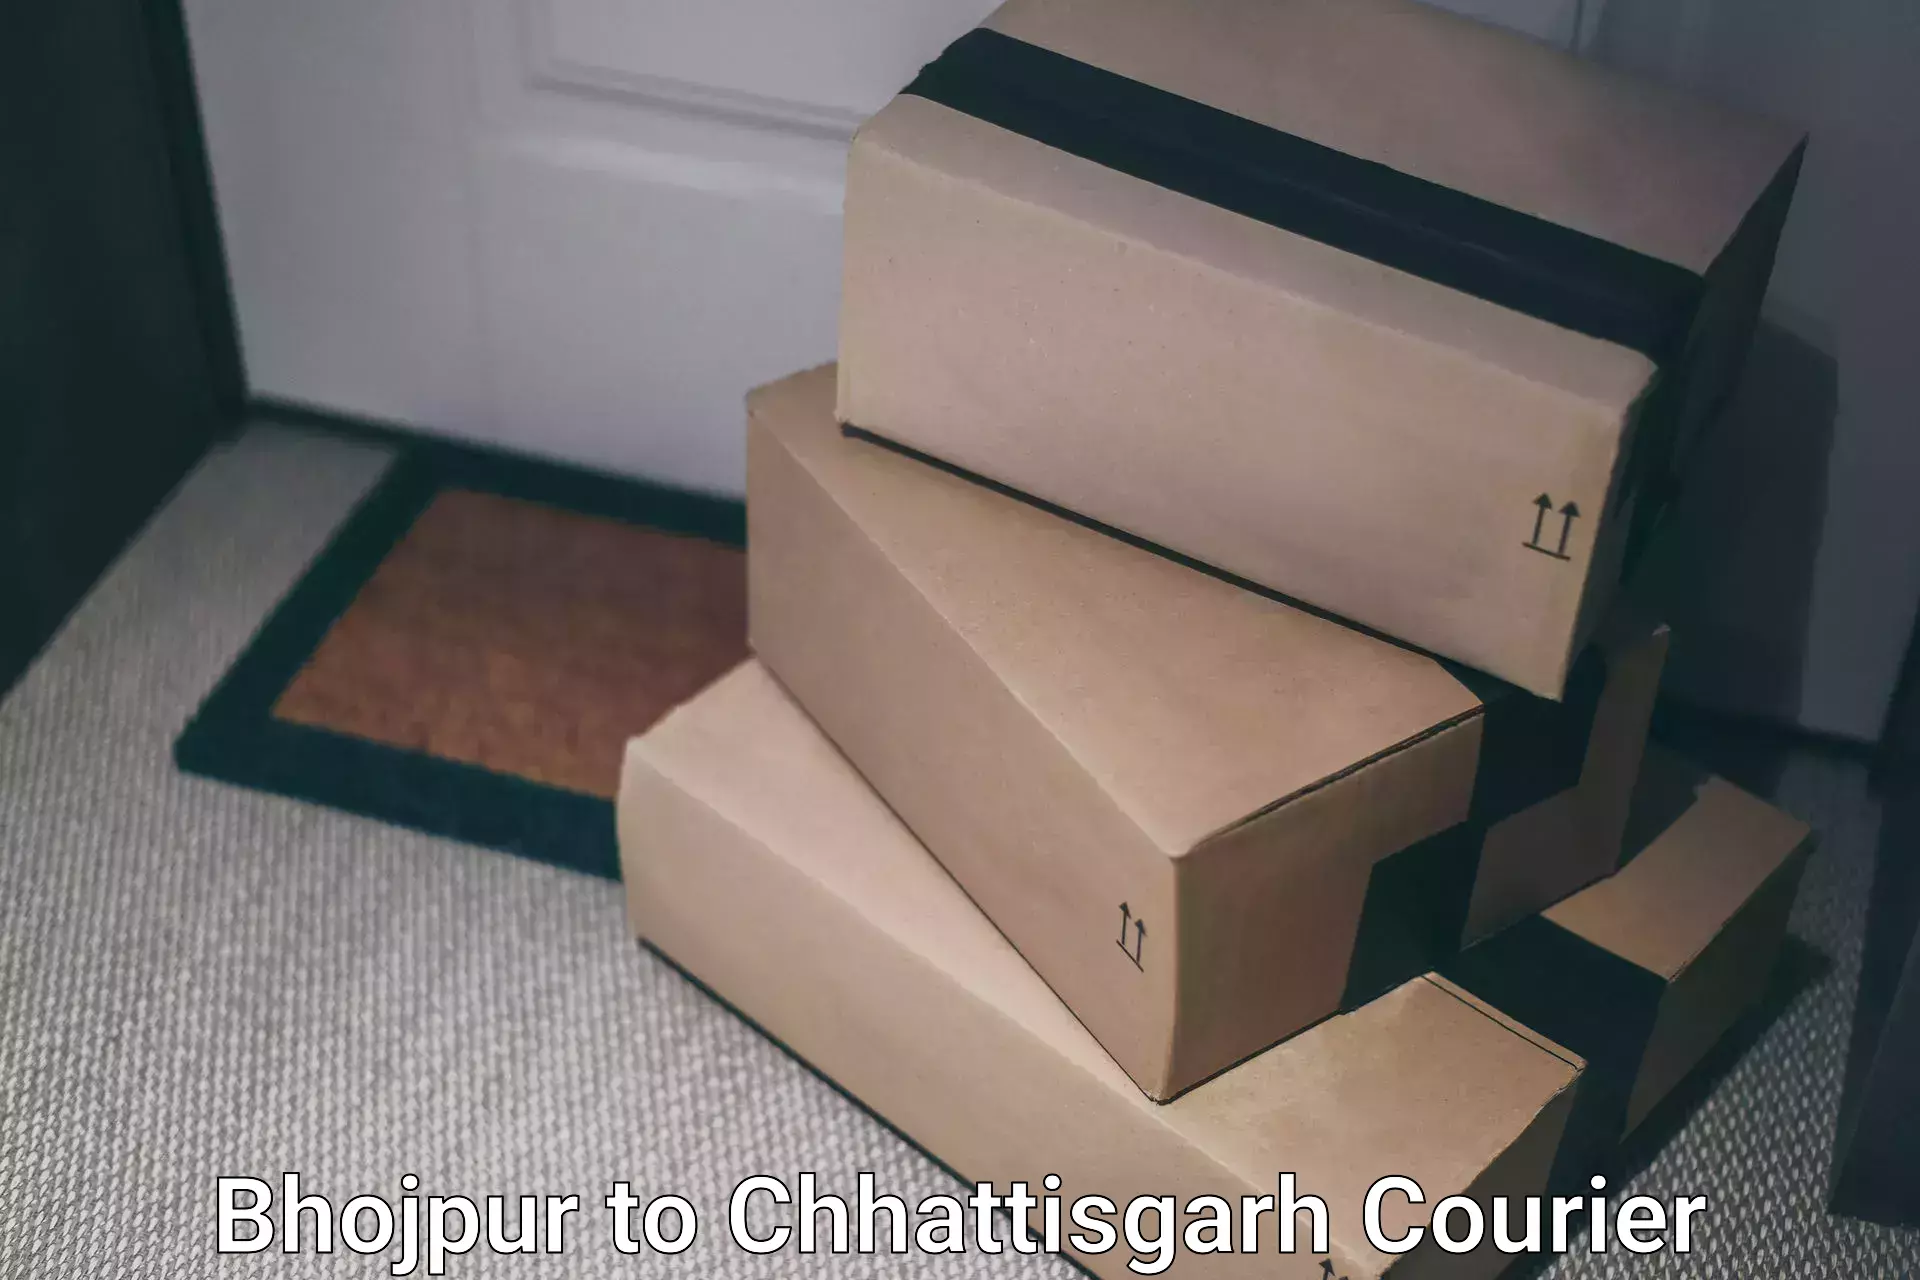 Automated parcel services Bhojpur to Chhattisgarh